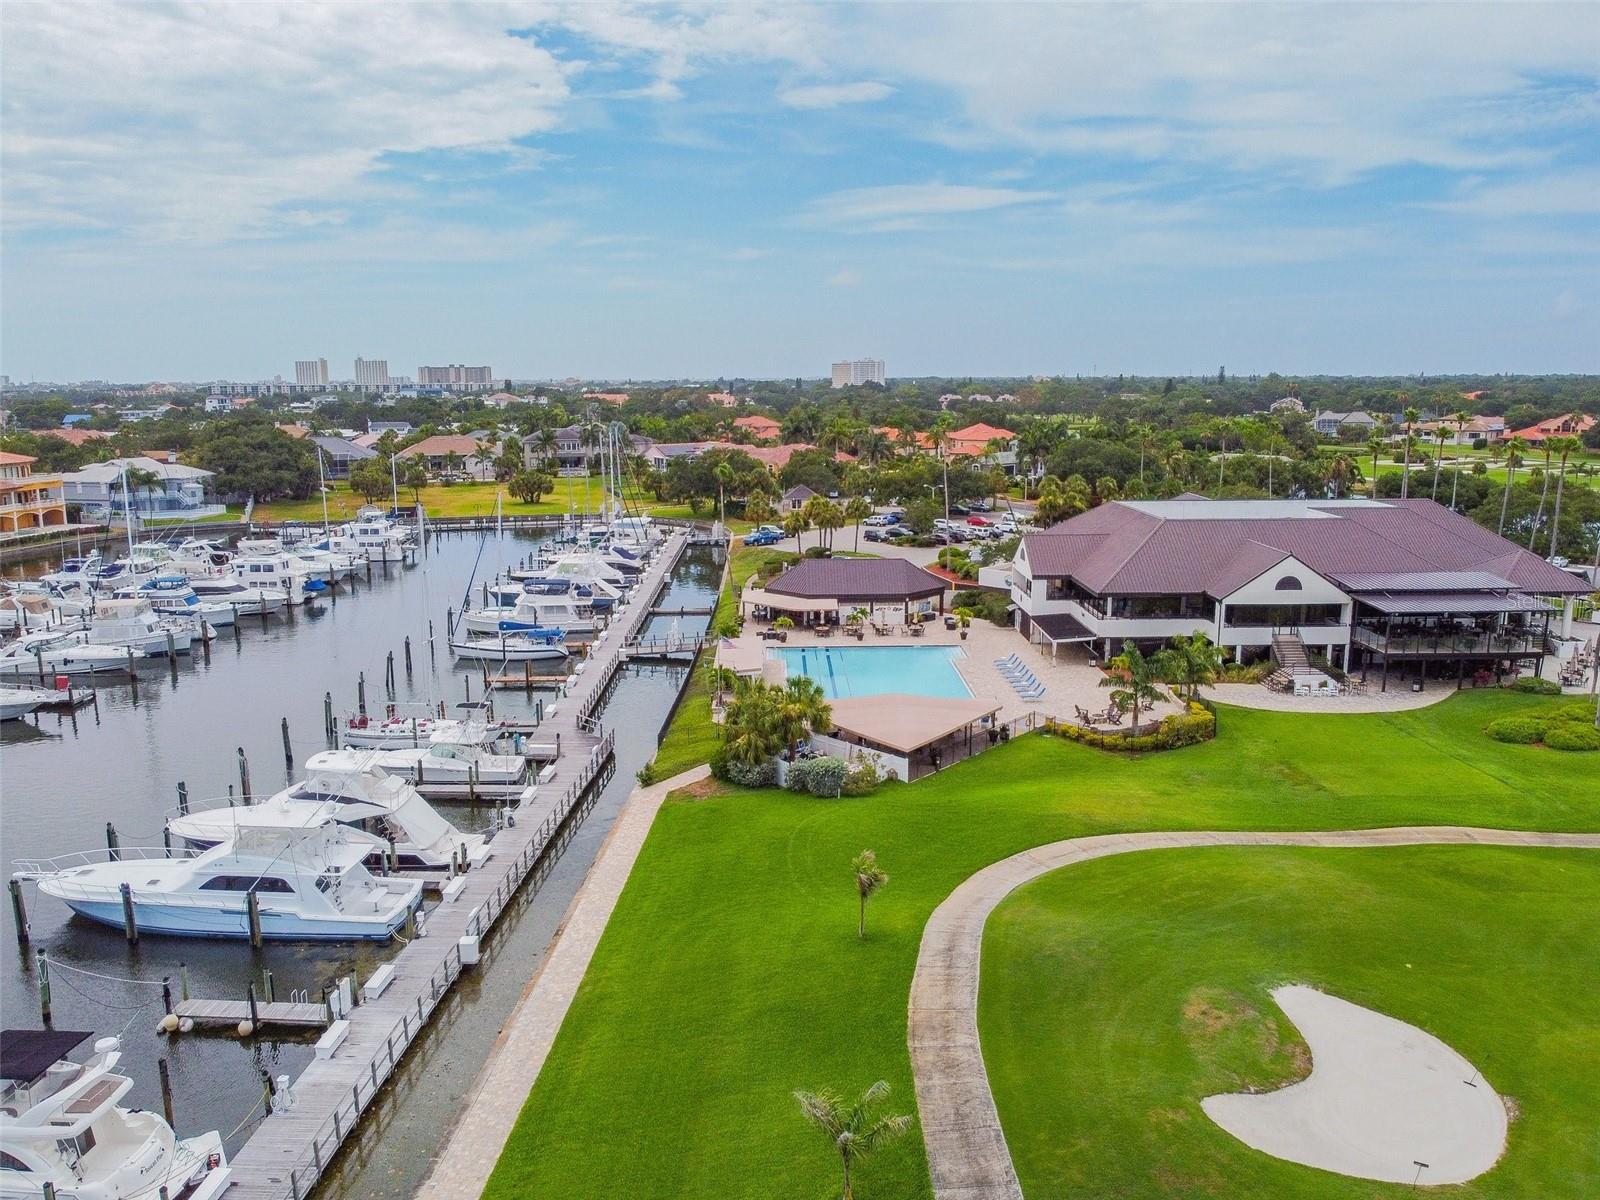 Golf Course and Marina-Slip 25 (owned and for sale by owner is across the Street